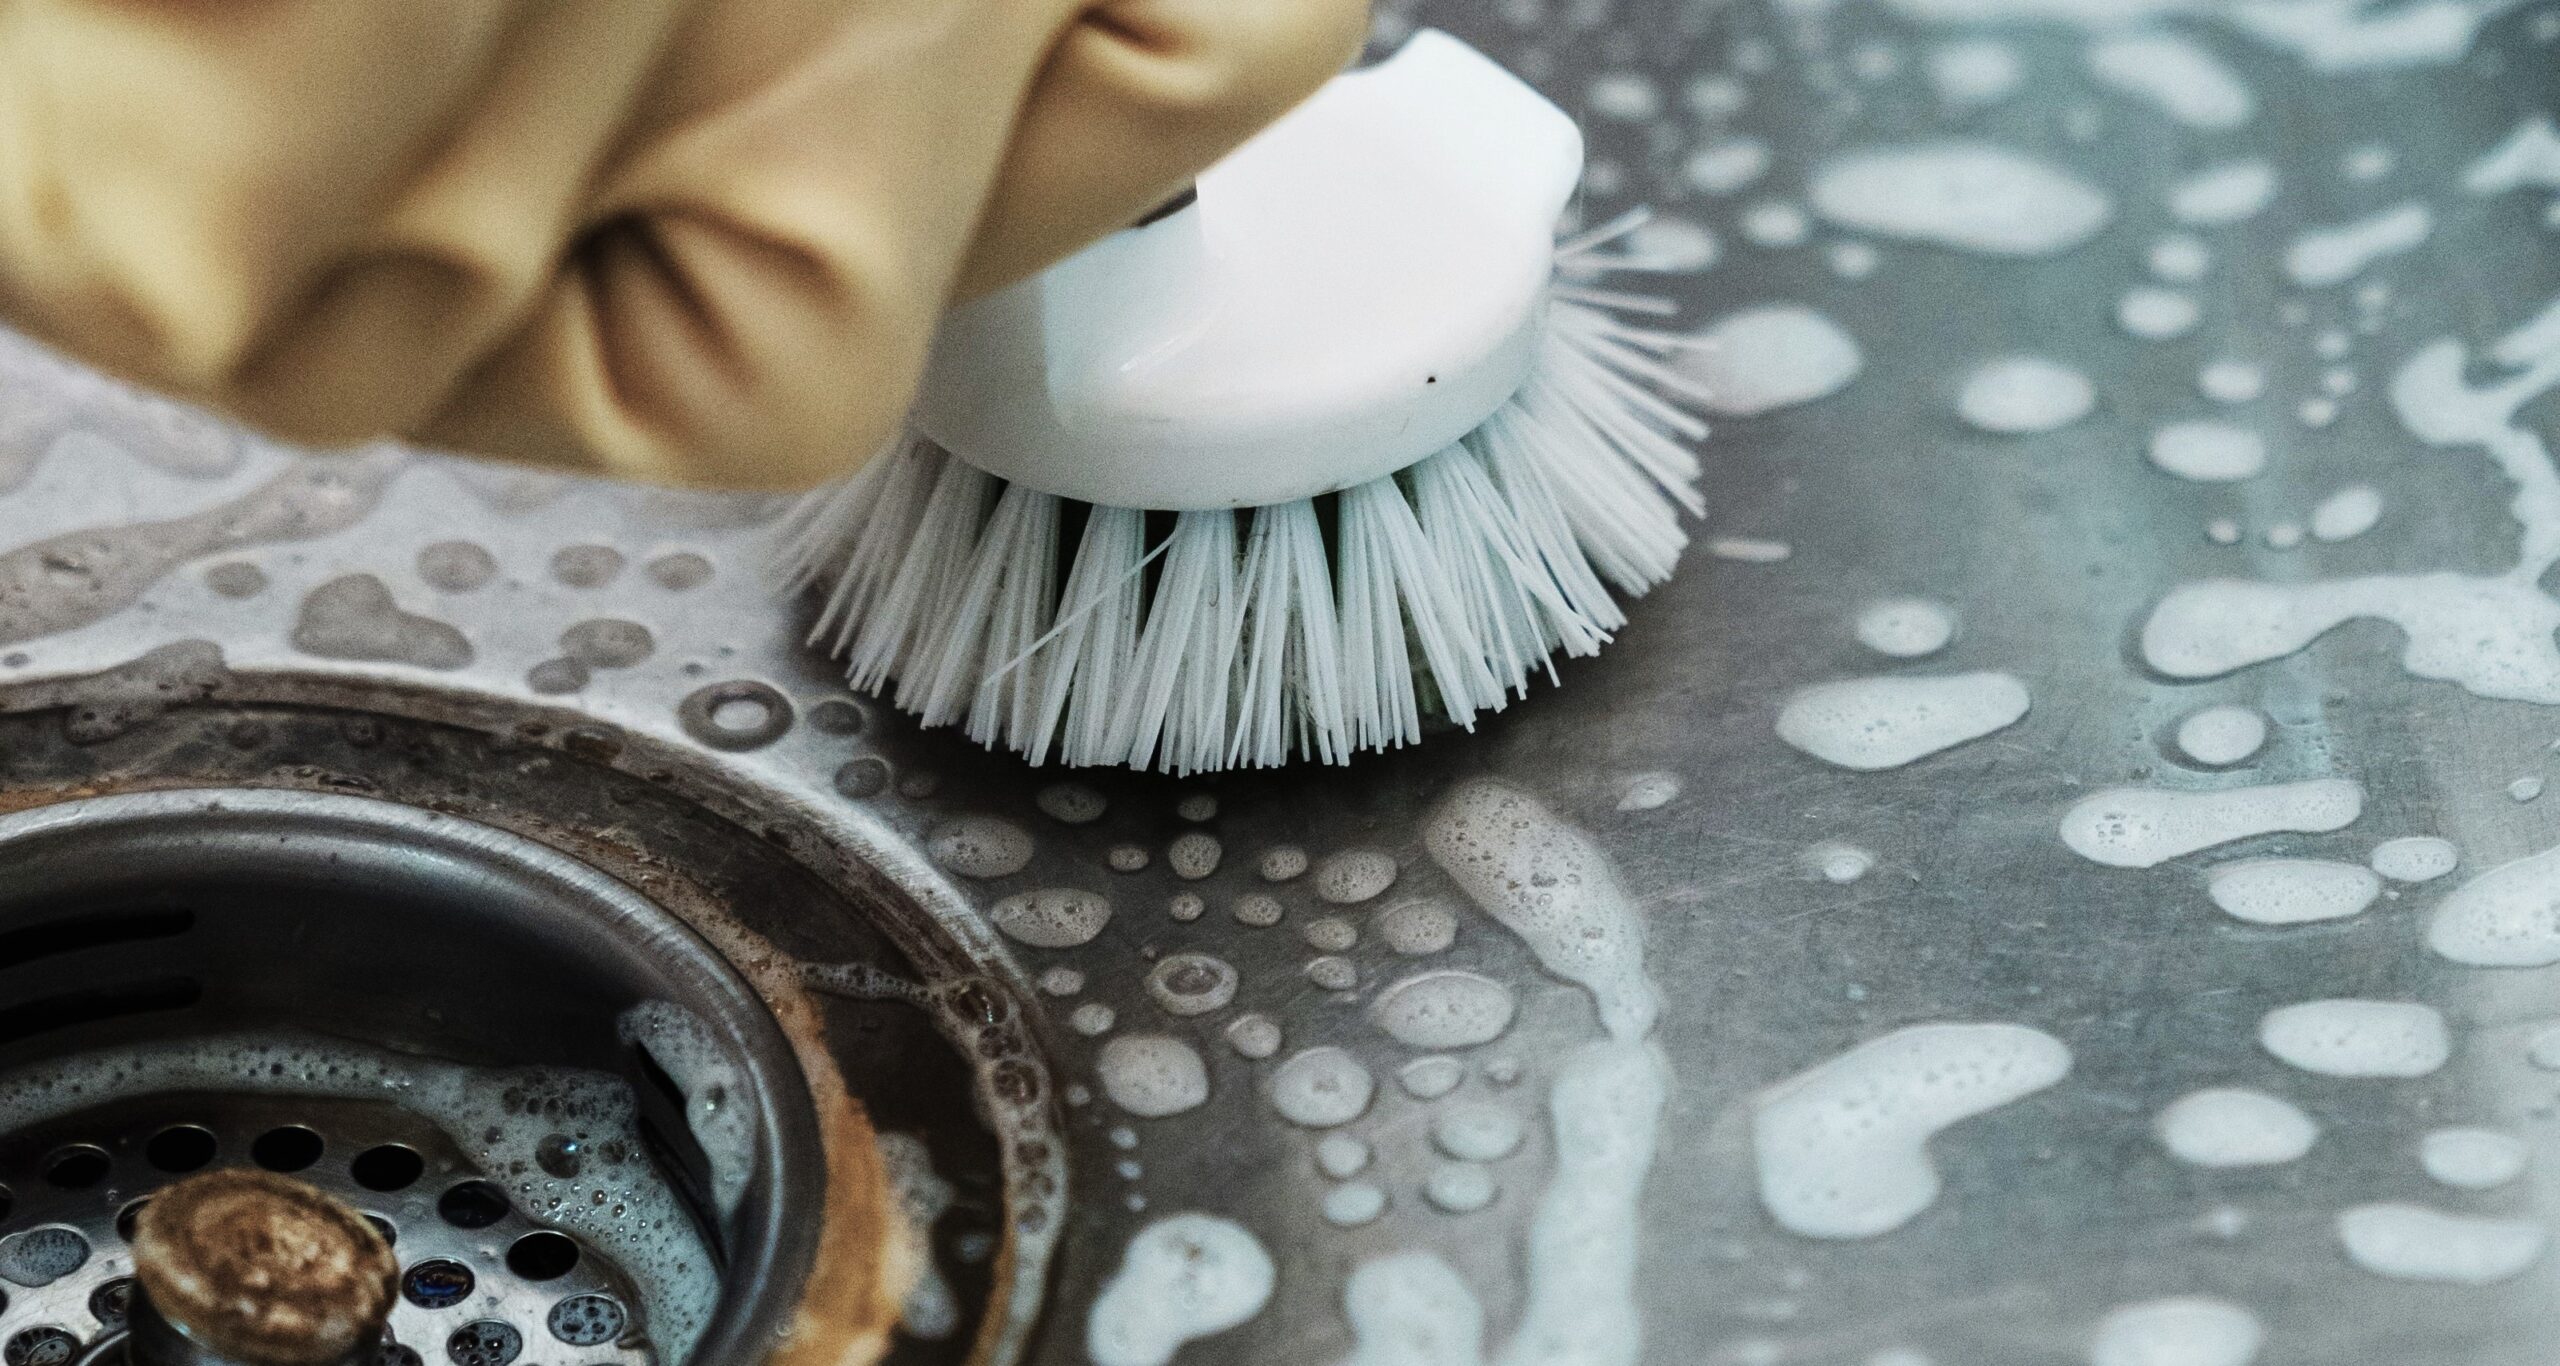 Stainless steel sinks need different cleaning protocols than ceramic ones.